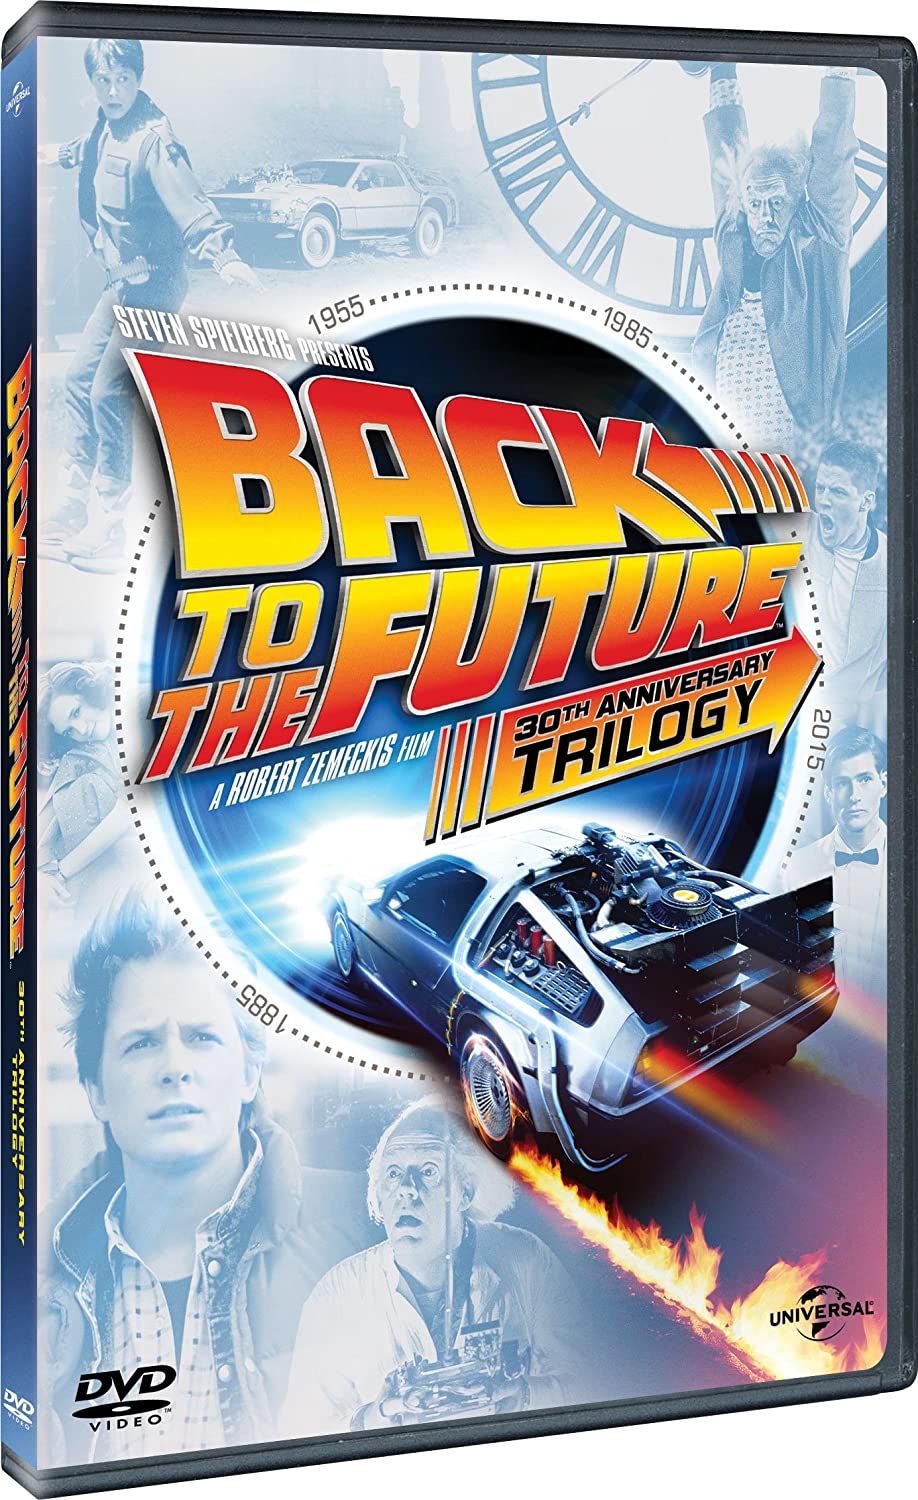 Back to The Future Trilogy [1985]